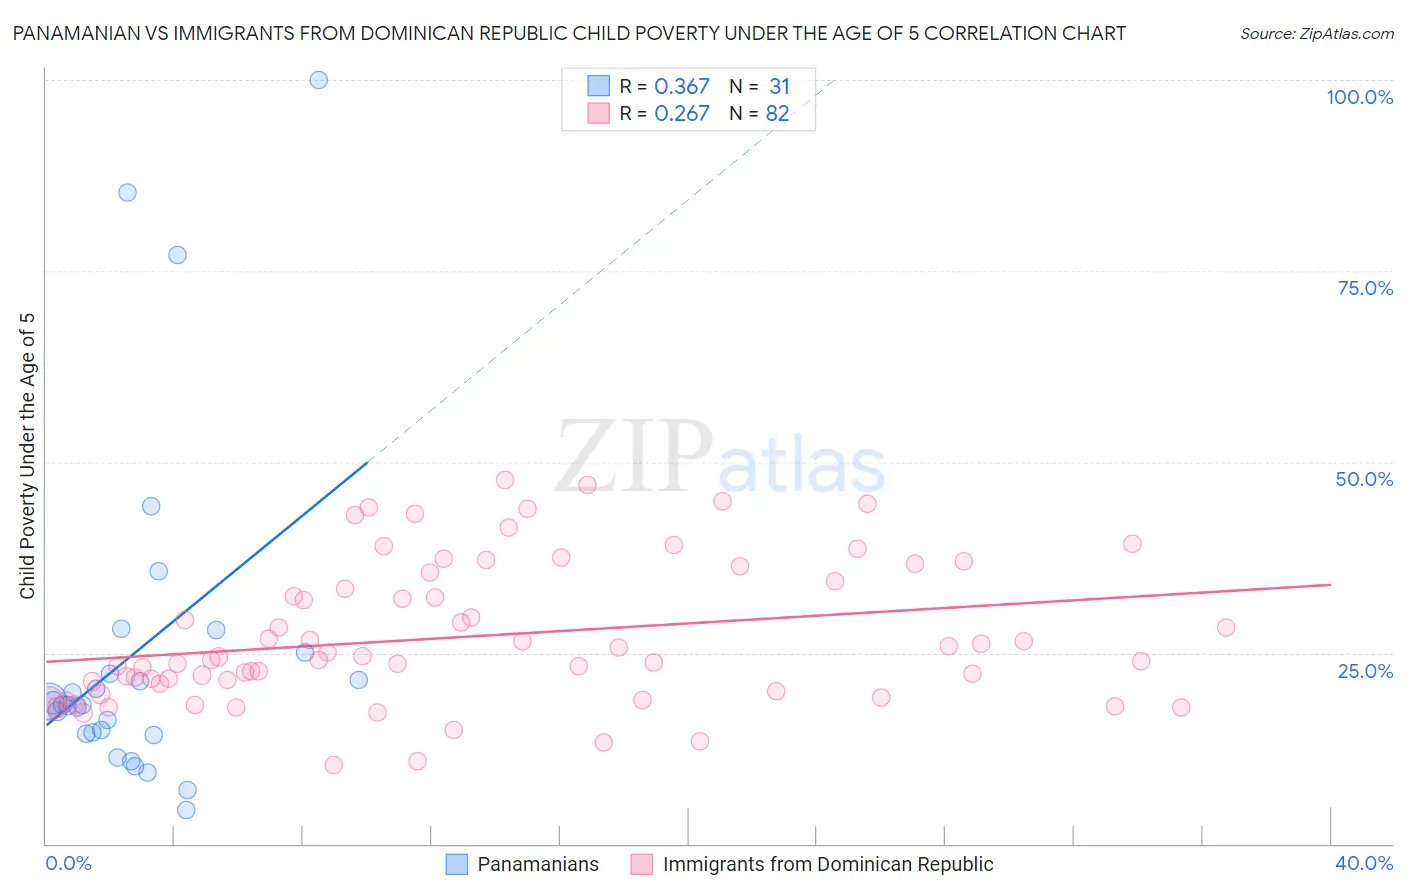 Panamanian vs Immigrants from Dominican Republic Child Poverty Under the Age of 5